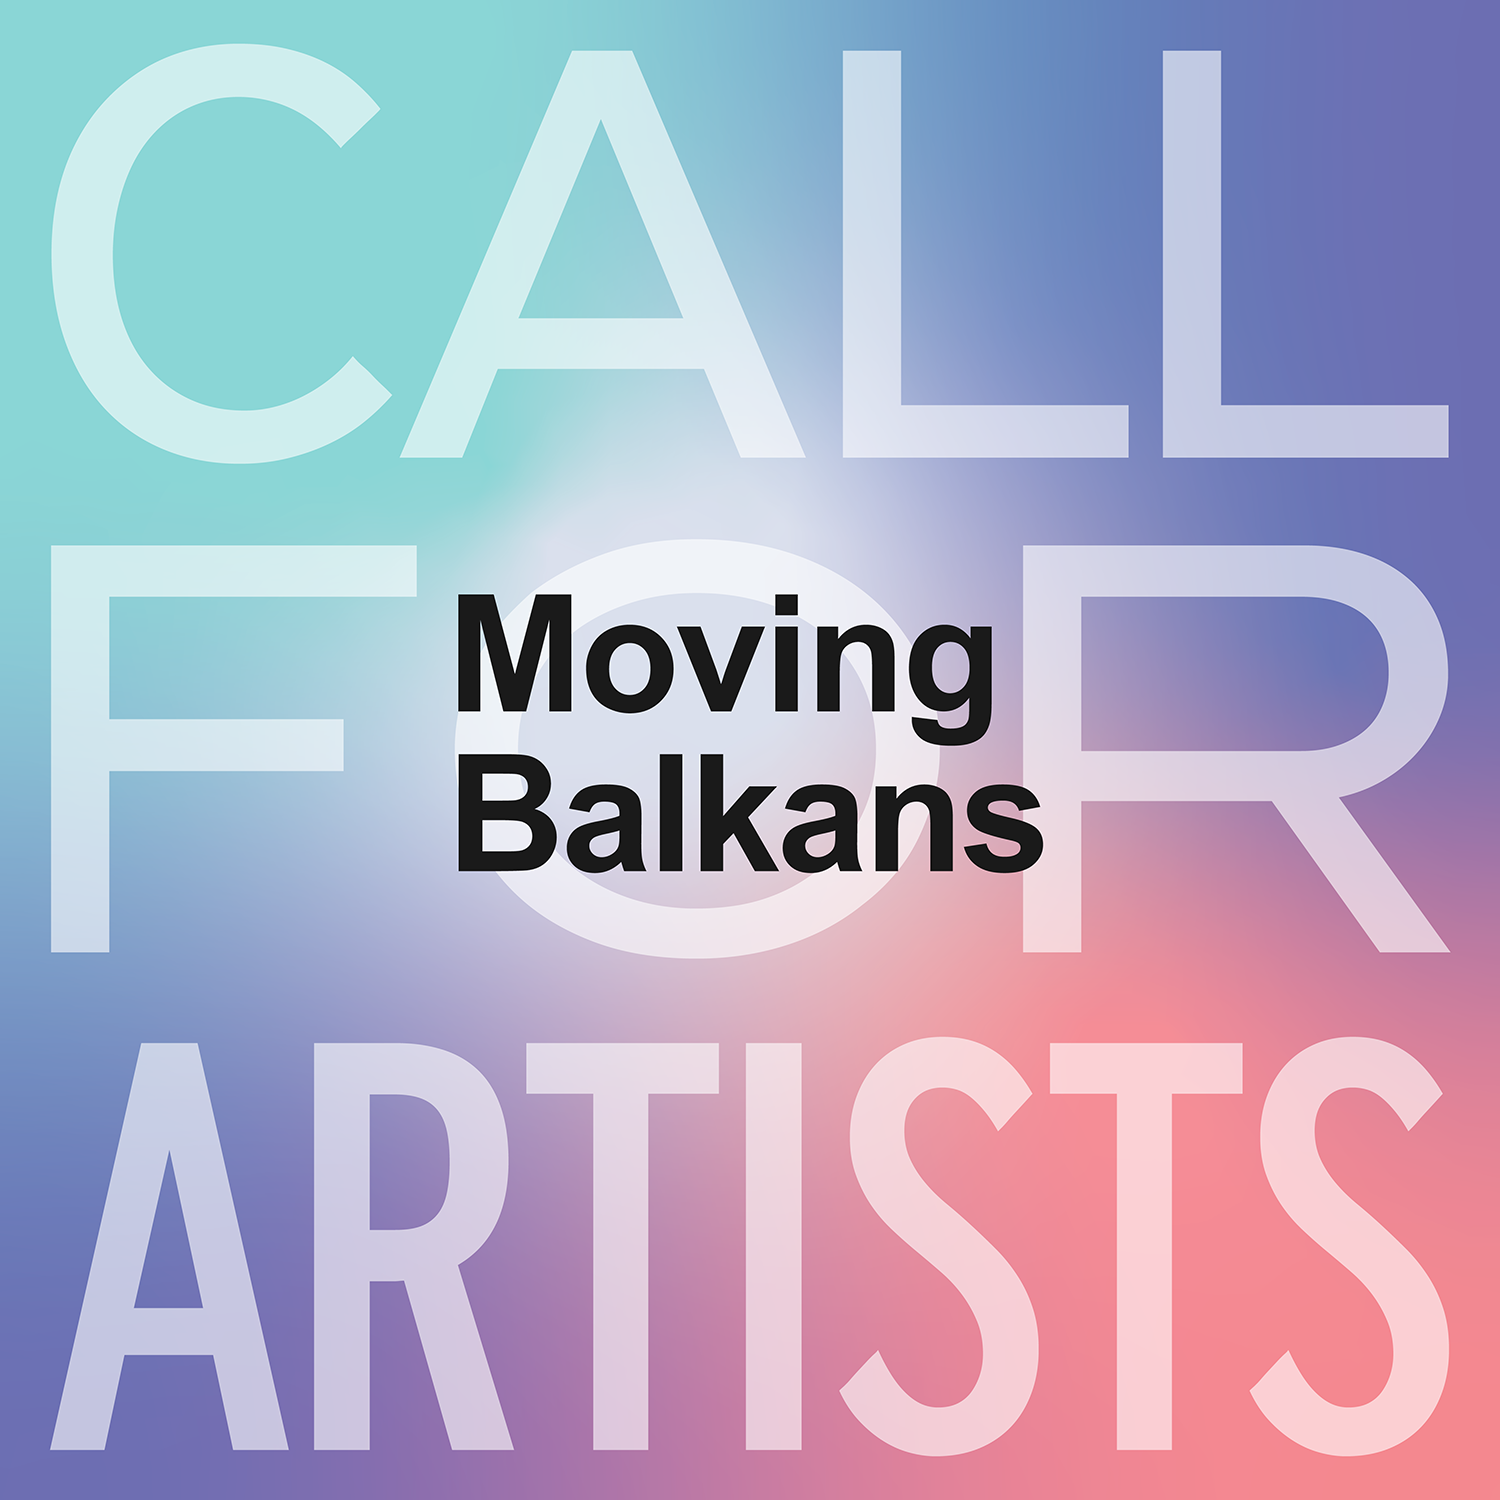 Moving Balkans: Open Call for Artists